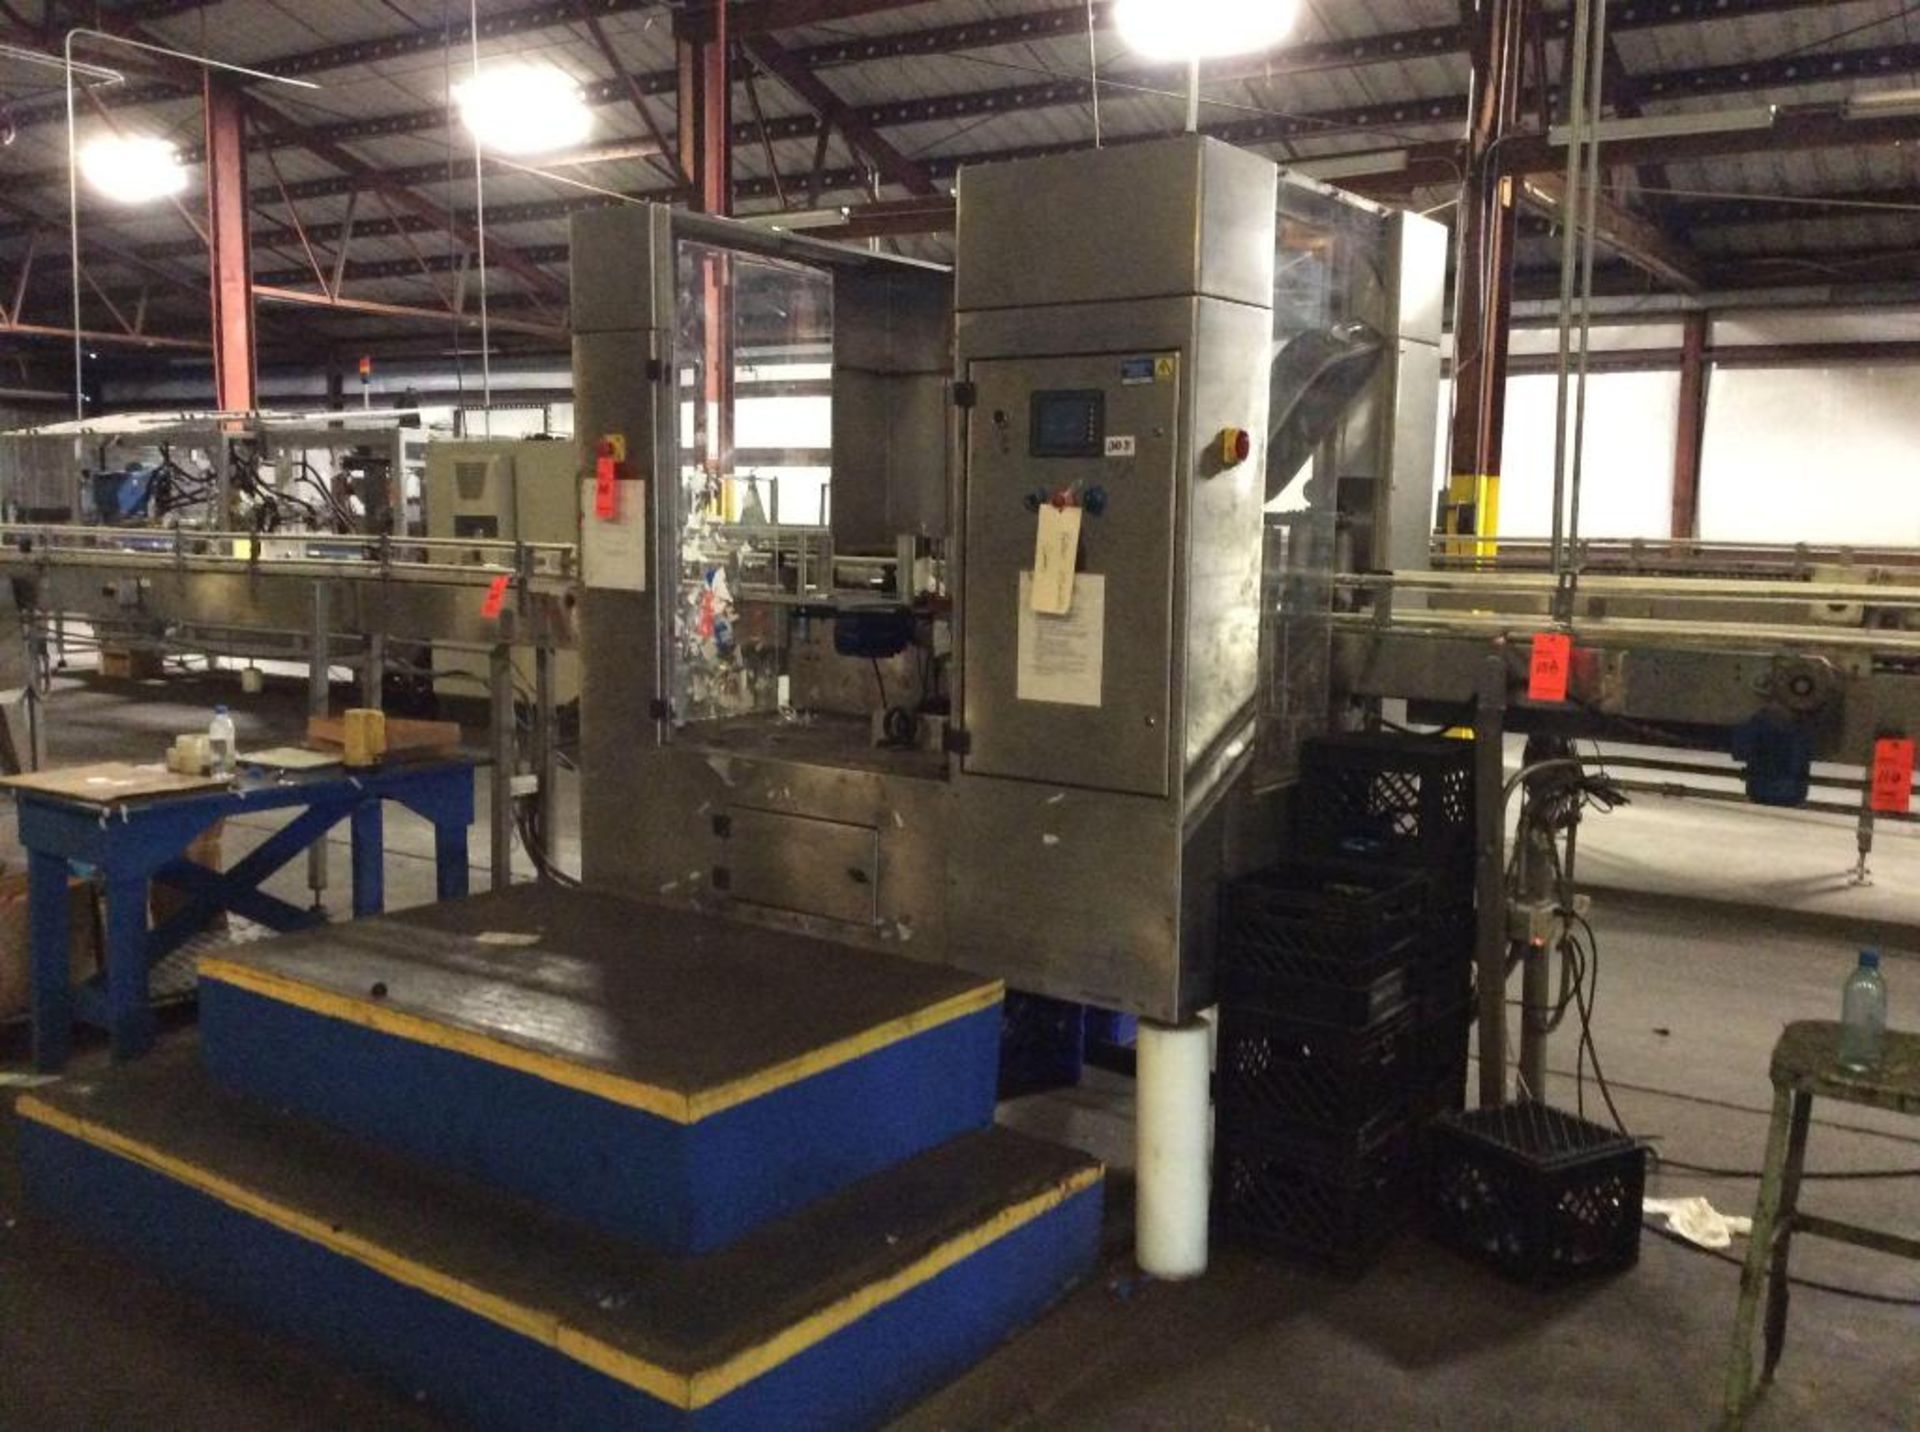 Ketan stainless steel High Speed Wraparound Labeler, mn HSW-350, sn 410815, capable speed of 300 con - Image 2 of 5